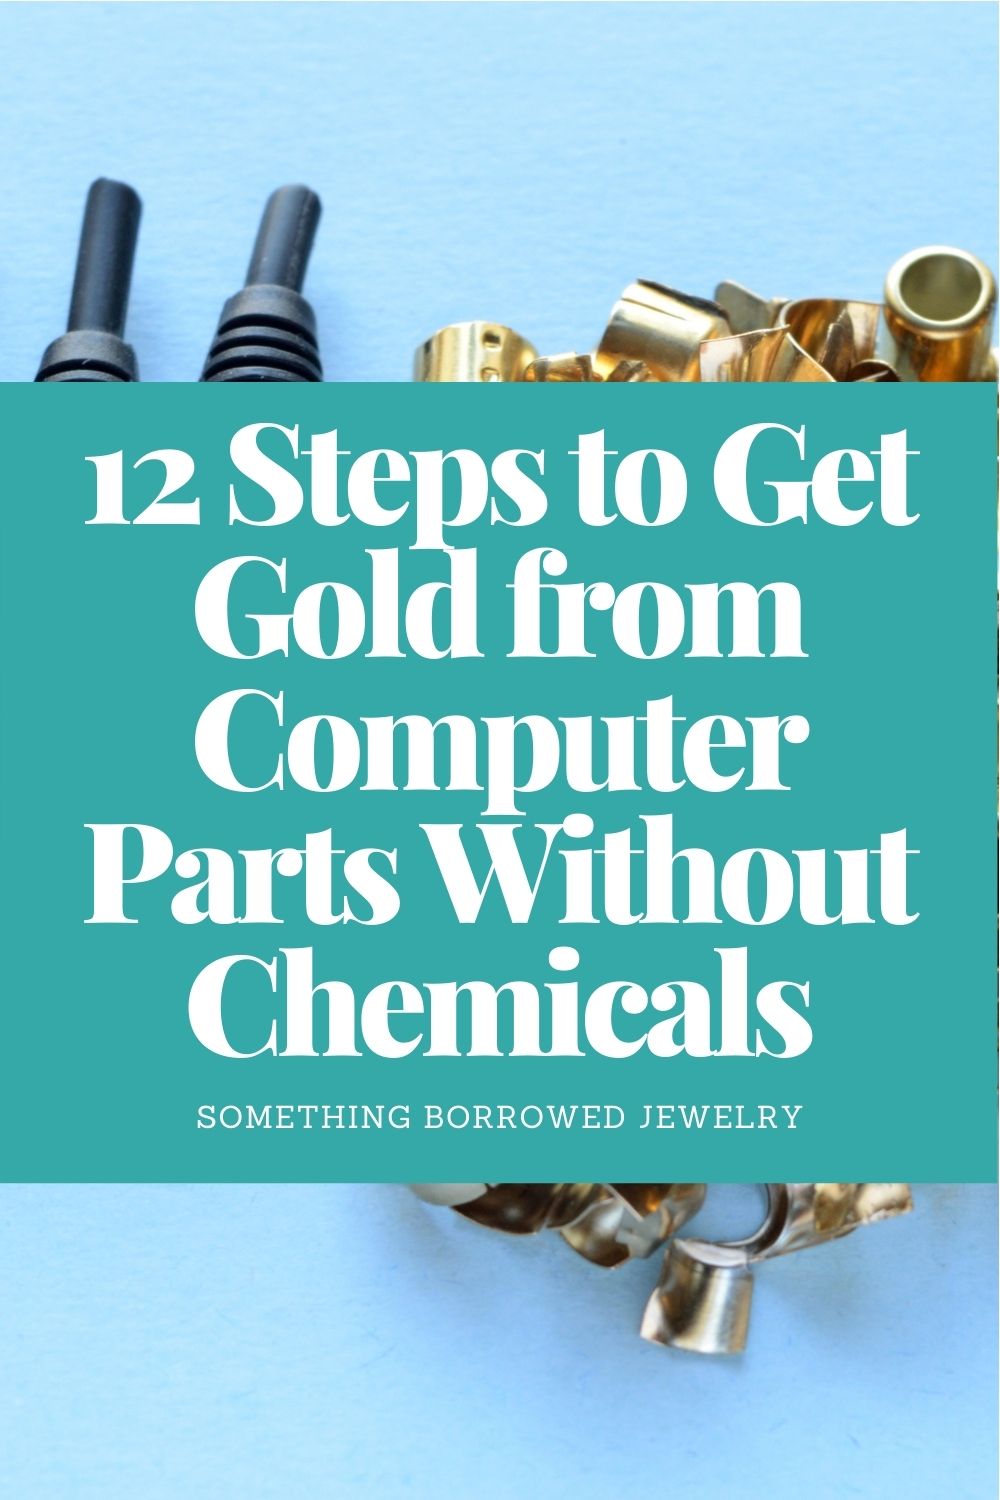 12 Steps to Get Gold from Computer Parts Without Chemicals pin